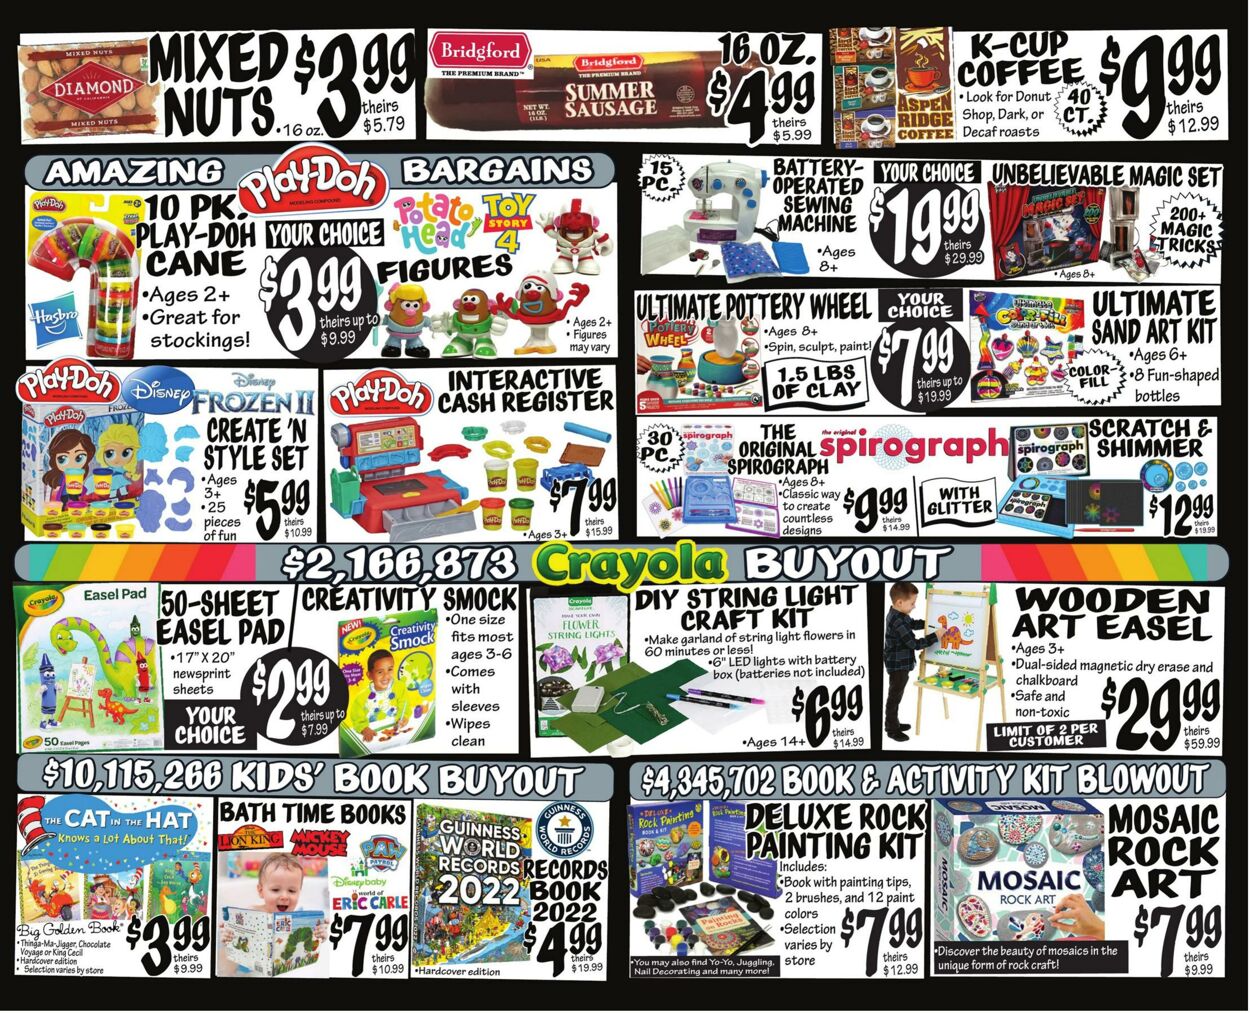 Weekly ad Ollie's 12/01/2022 - 12/07/2022